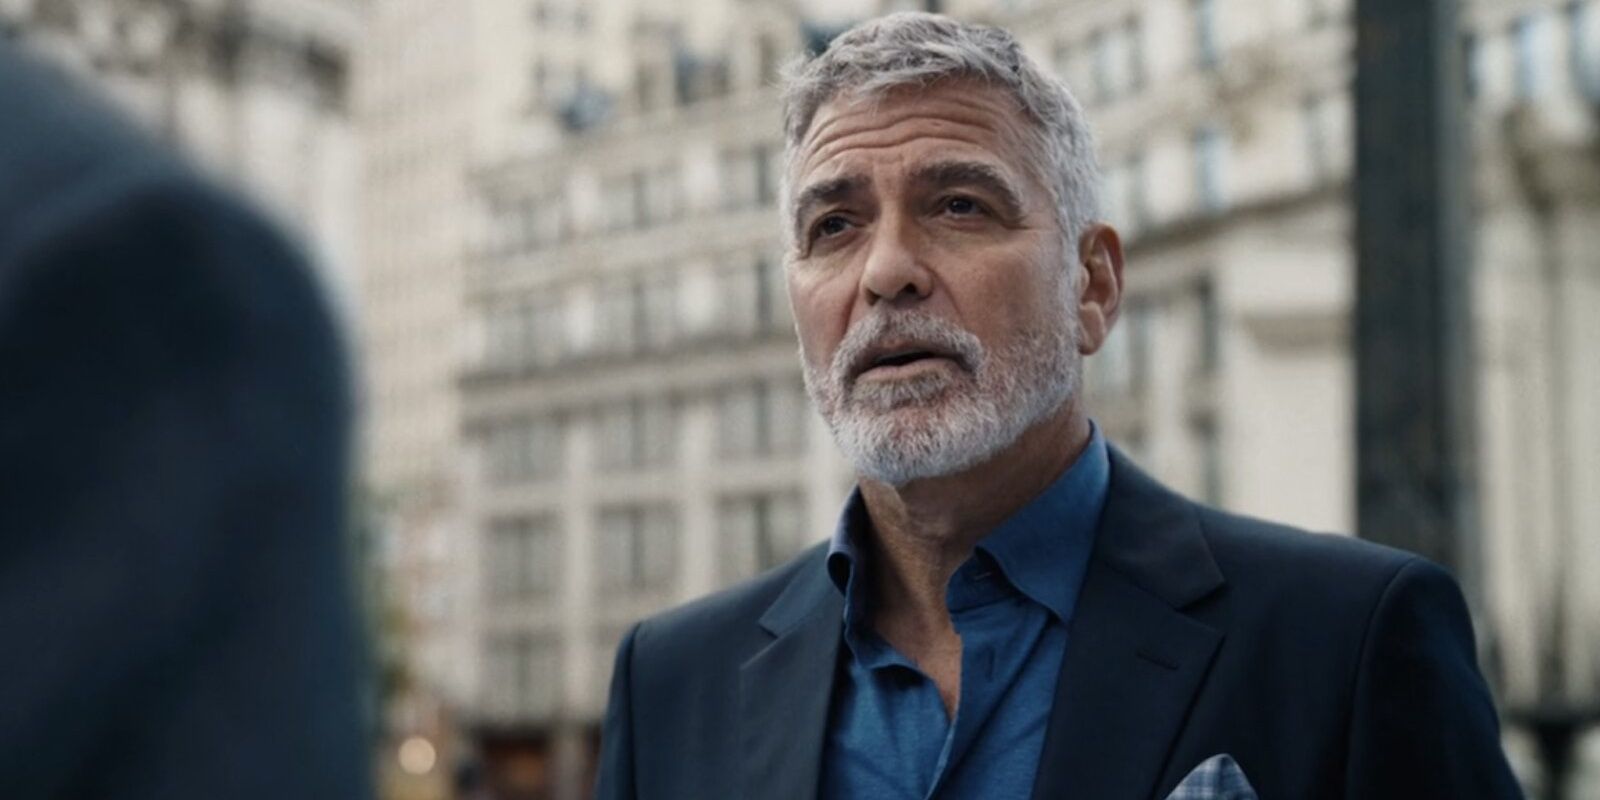 George Clooney appears as Bruce Wayne in The Flash